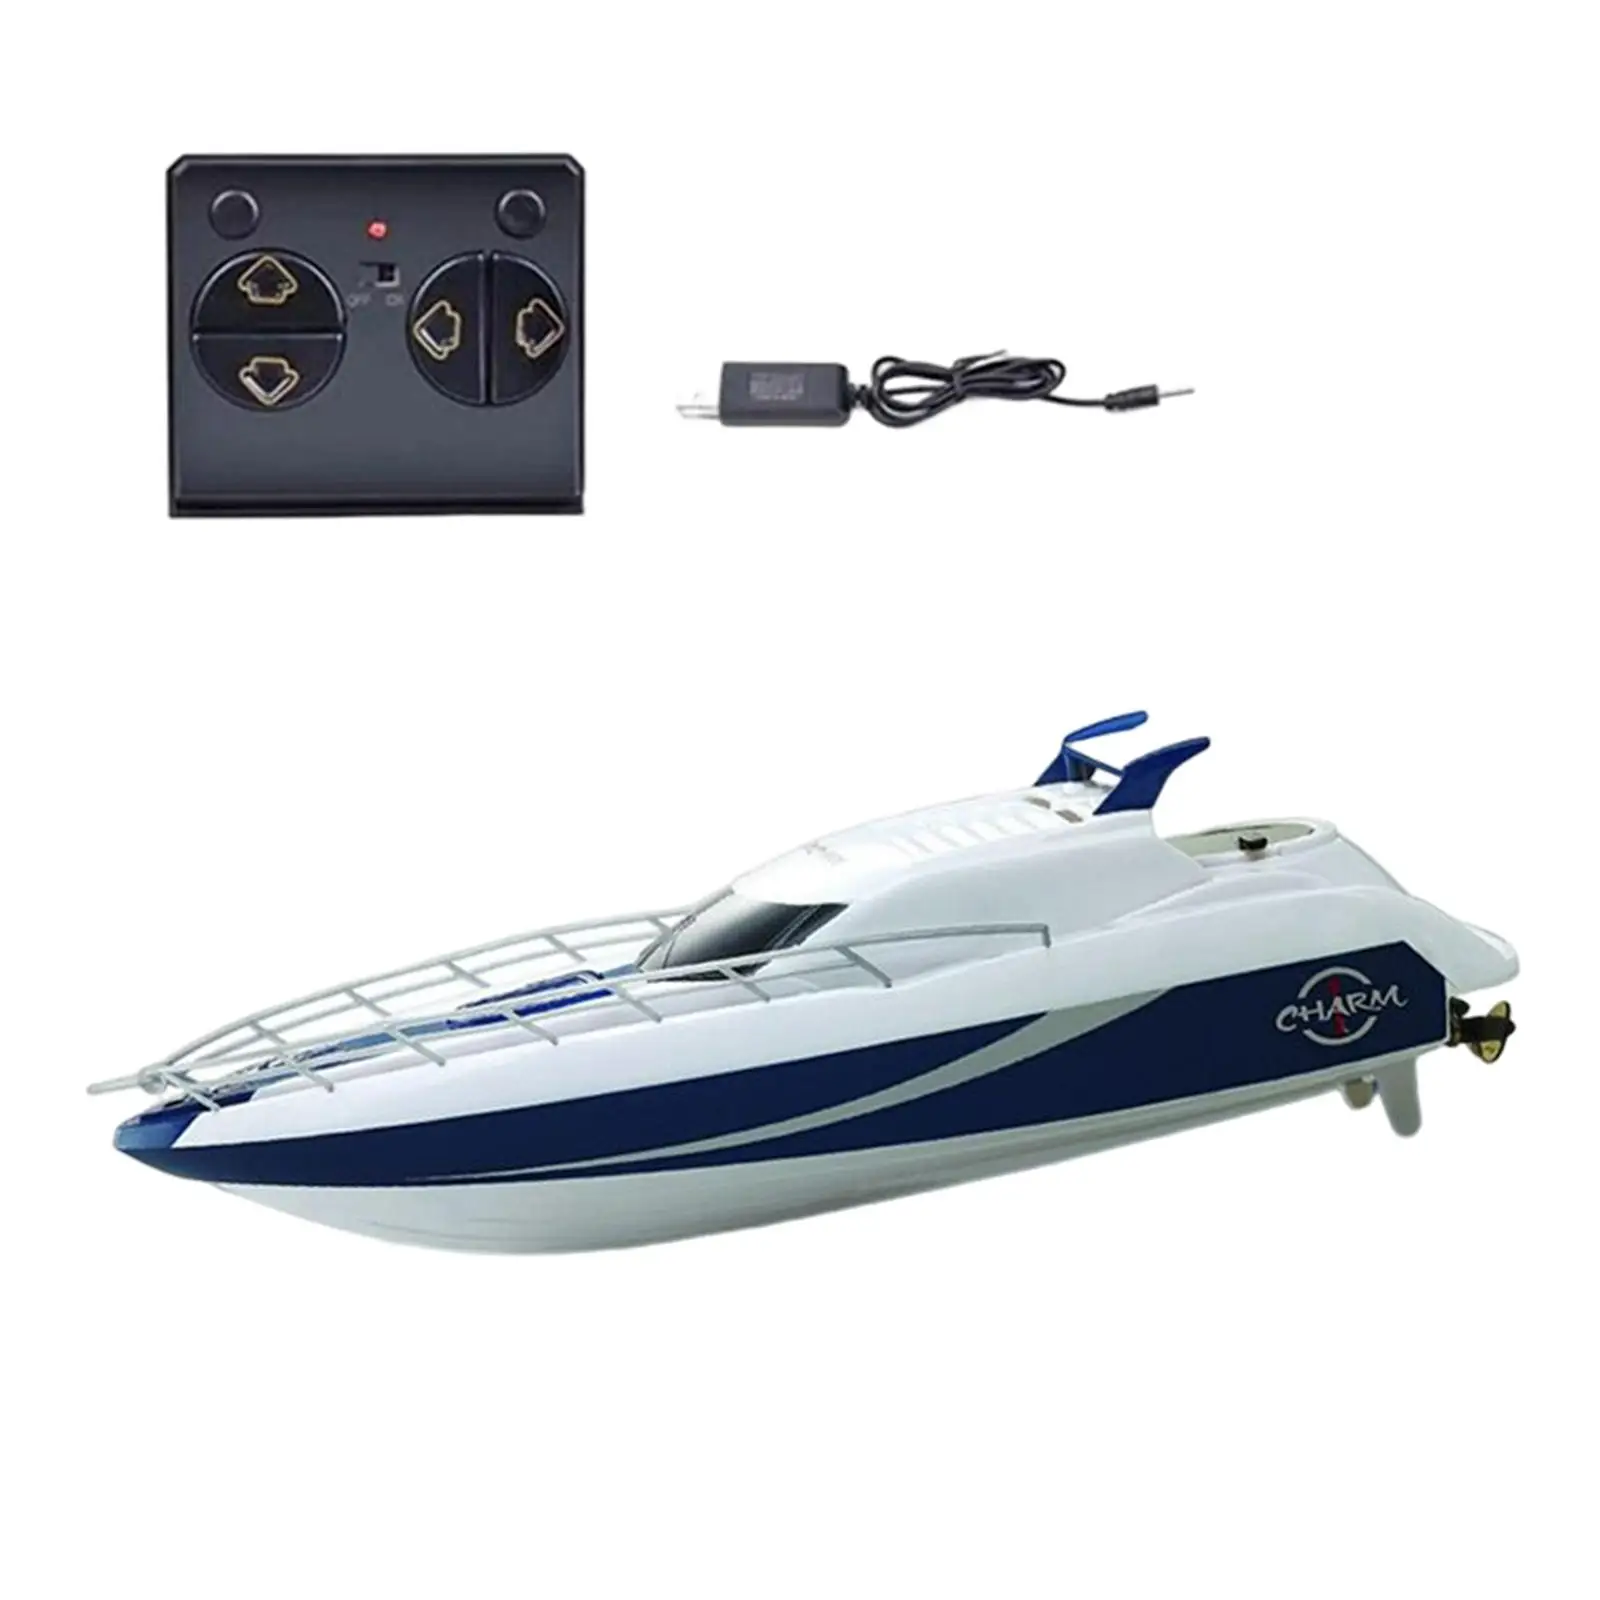 Portable Remote Control Boat Speedboat USB Rechargeable RC Boat Warship Model for Kids Children Boys Girls Birthday Gifts